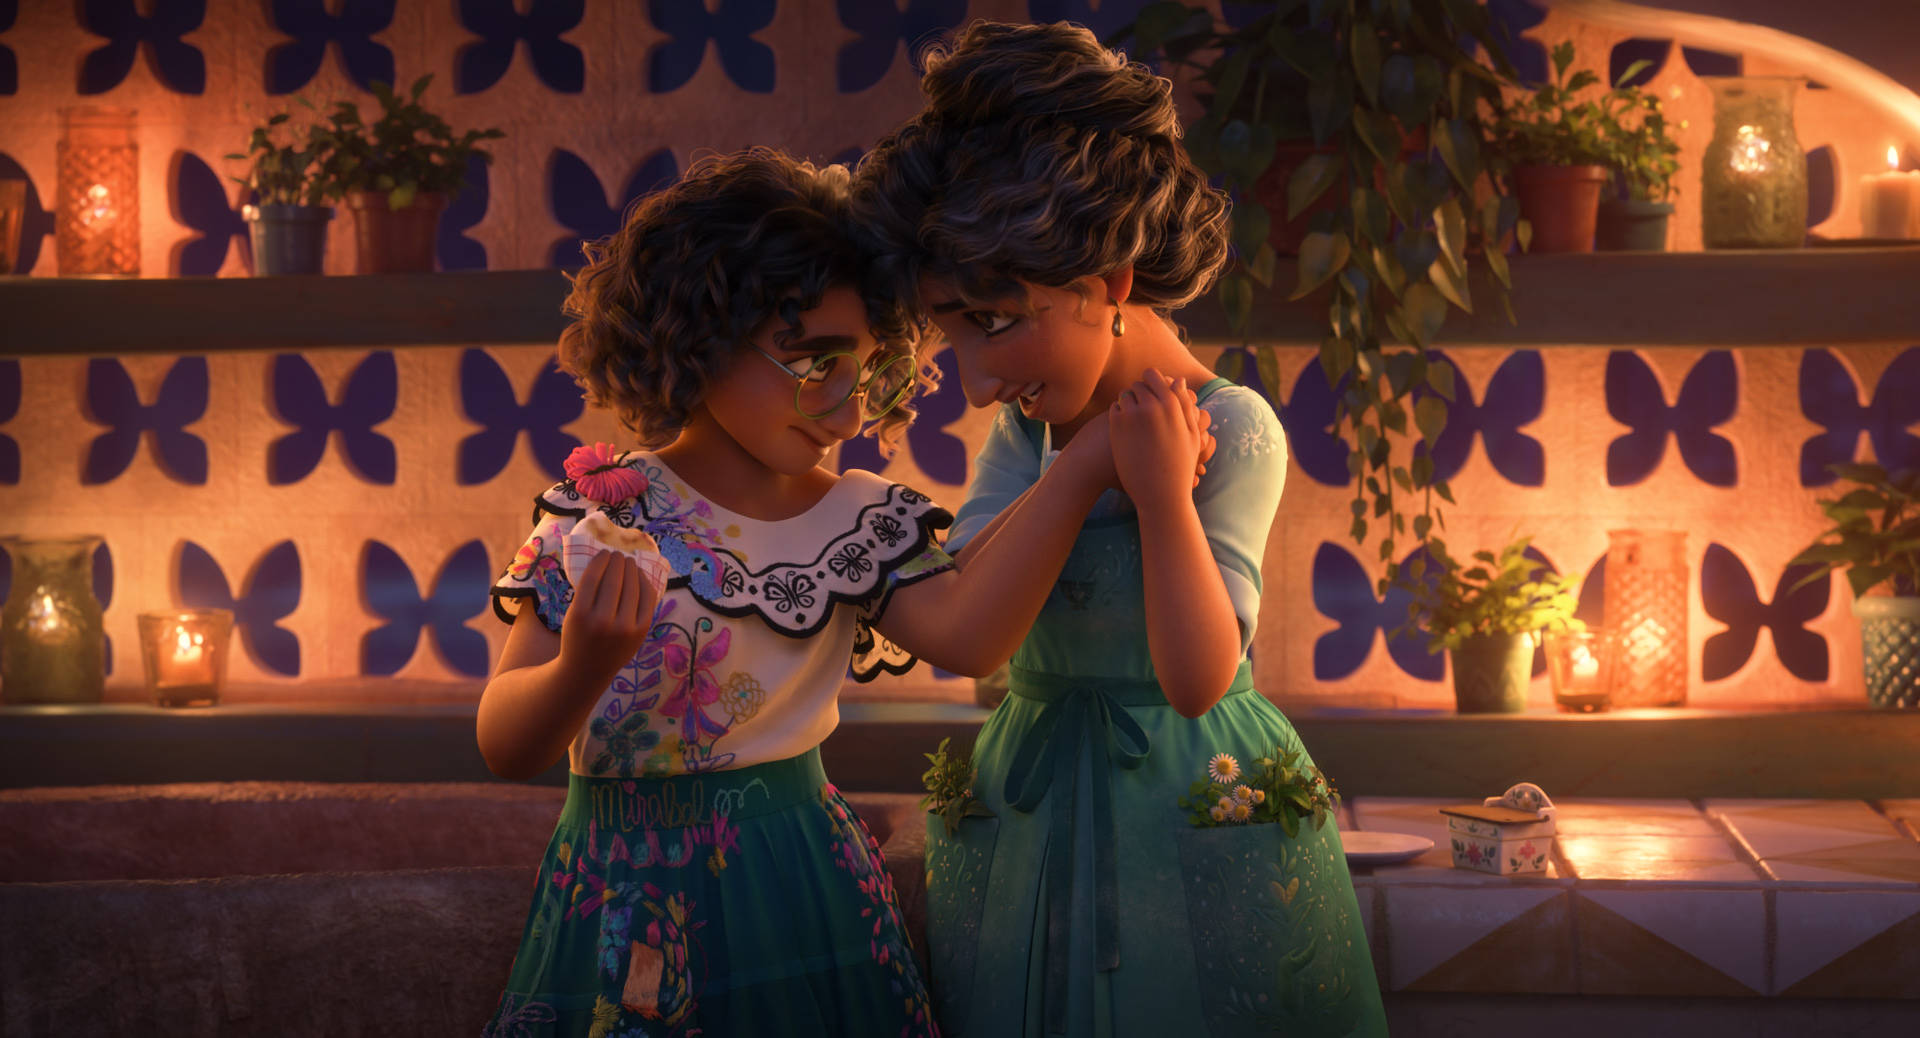 Encanto - Mirabel and her mother Julieta in a profound moment Wallpaper